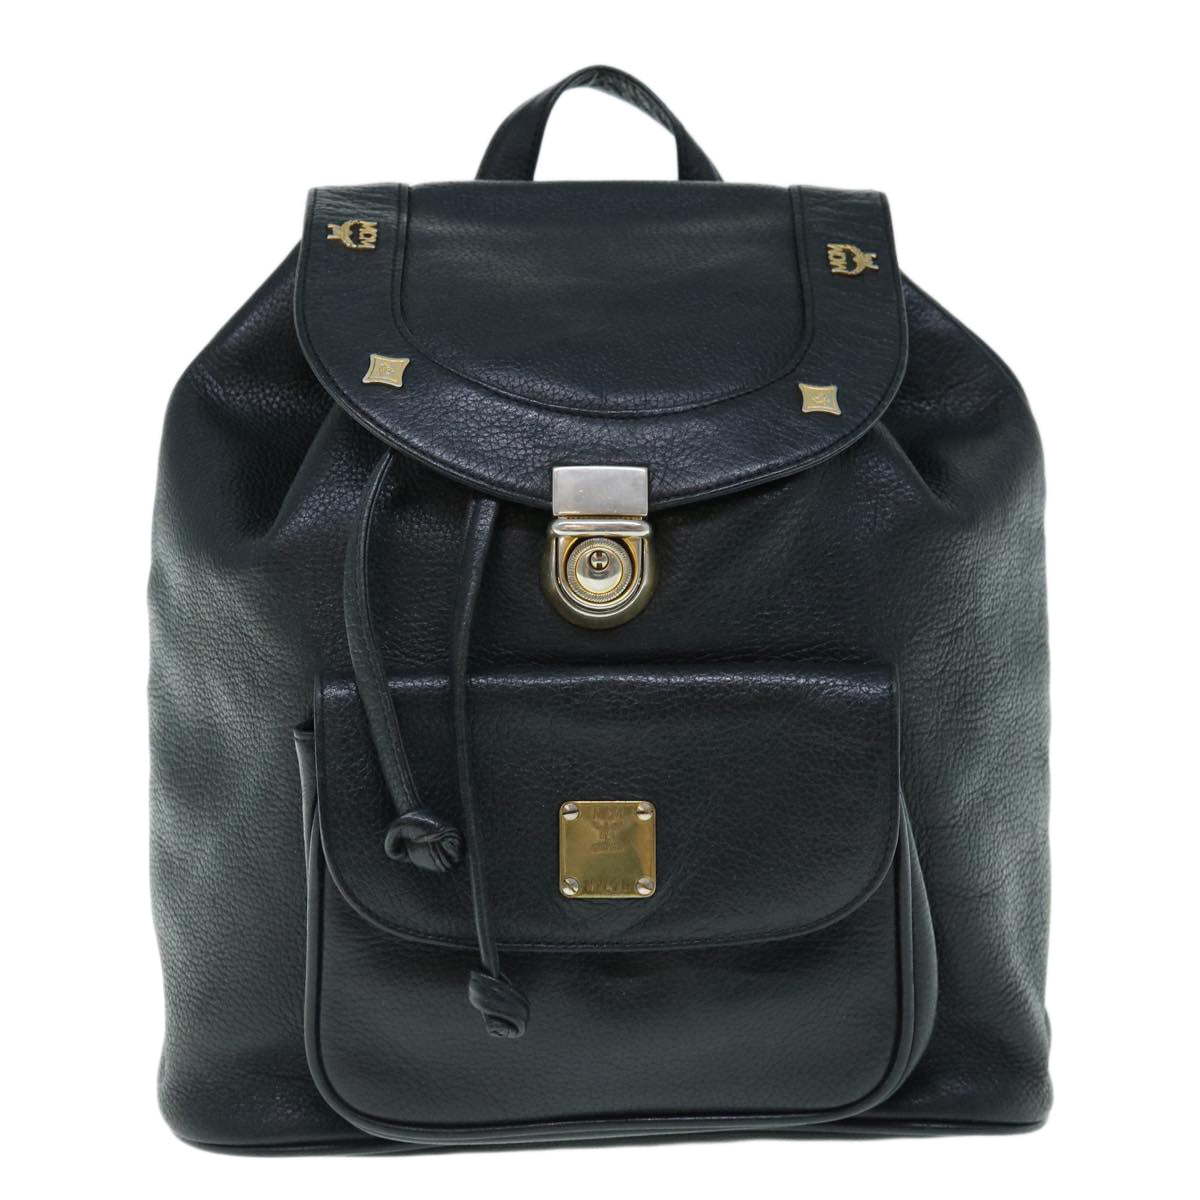 MCM Backpack Leather Black Auth hk924 - 0